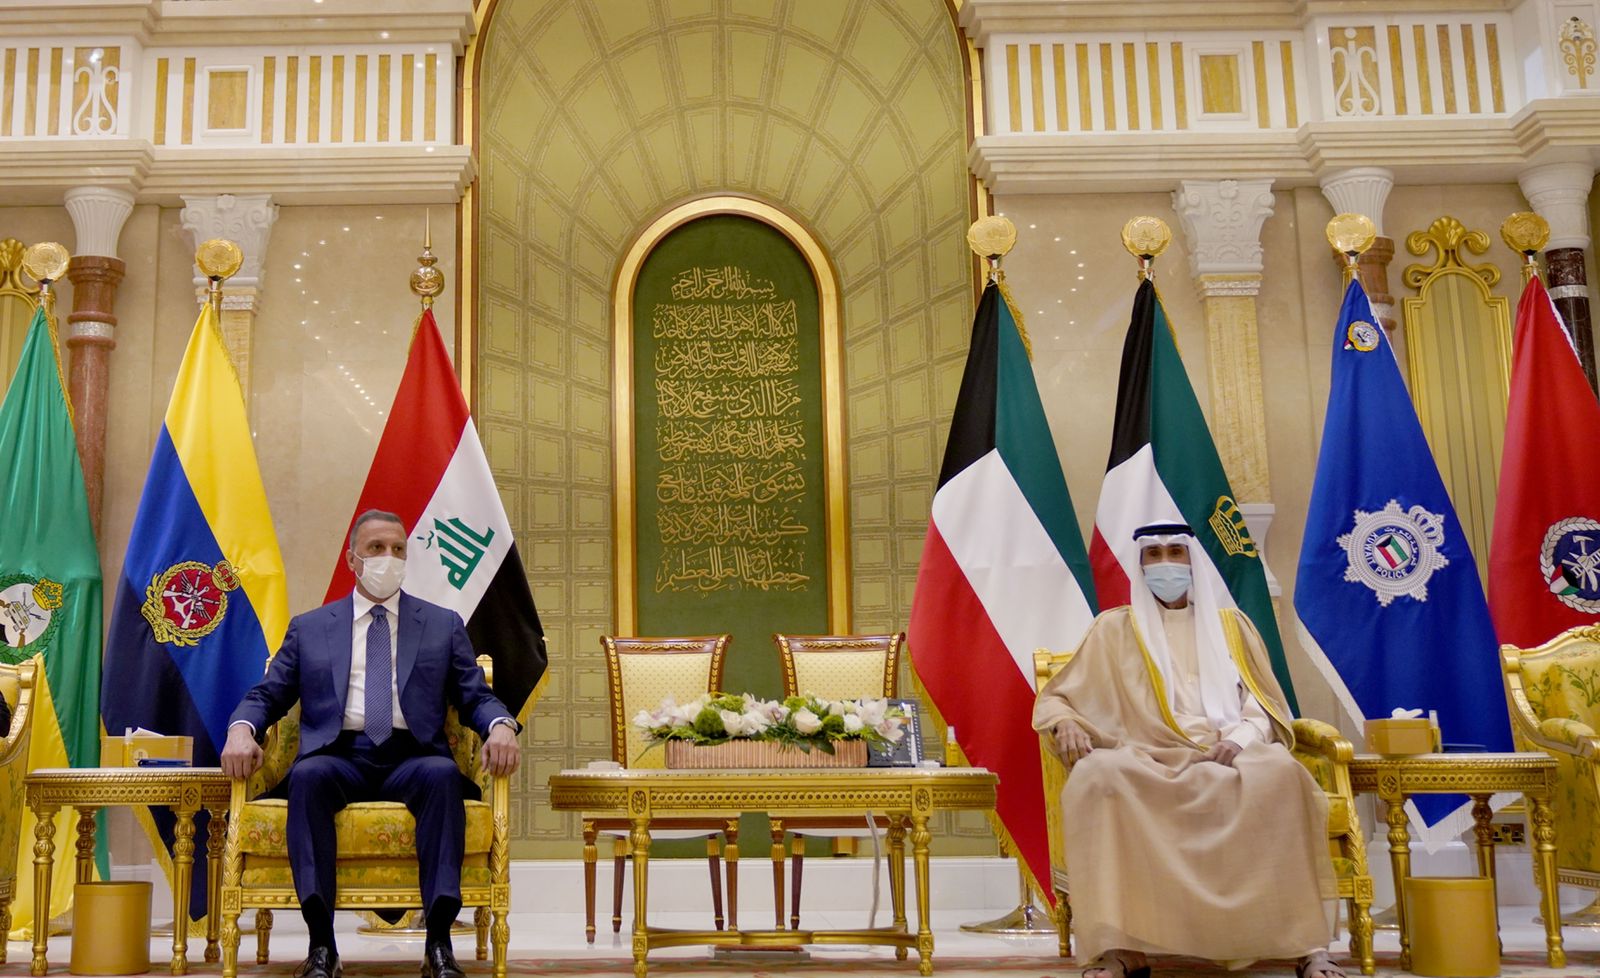 Al-Kadhimi invites Kuwait to partake in the Baghdad Summit at the highest level